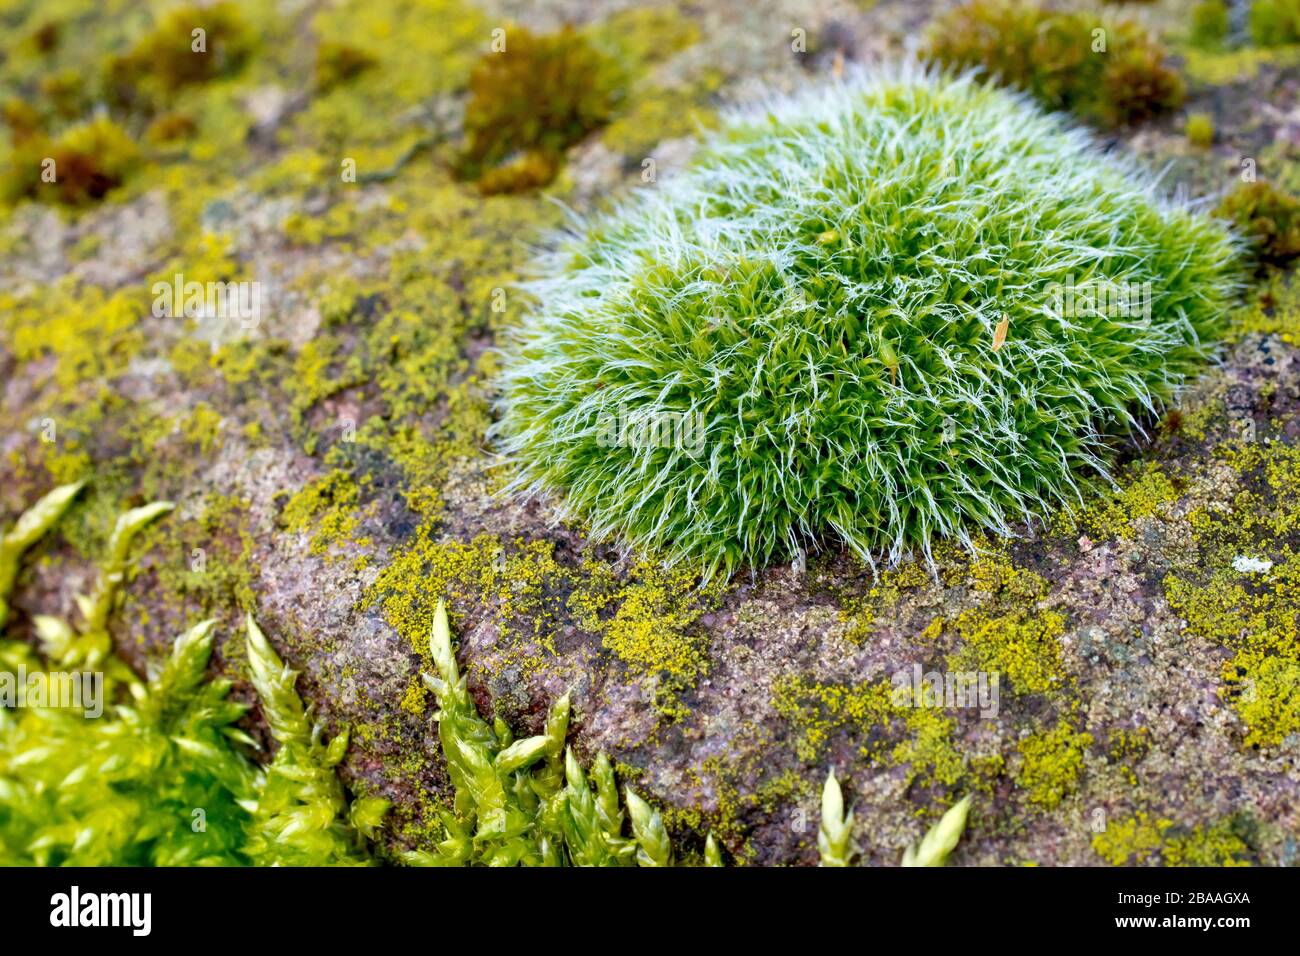 Grey Cushioned Grimmia (grimmia pulvinata), also known as Hedgehog Moss, close up of a single tuft of the moss at the edge of a sandstone block. Stock Photo